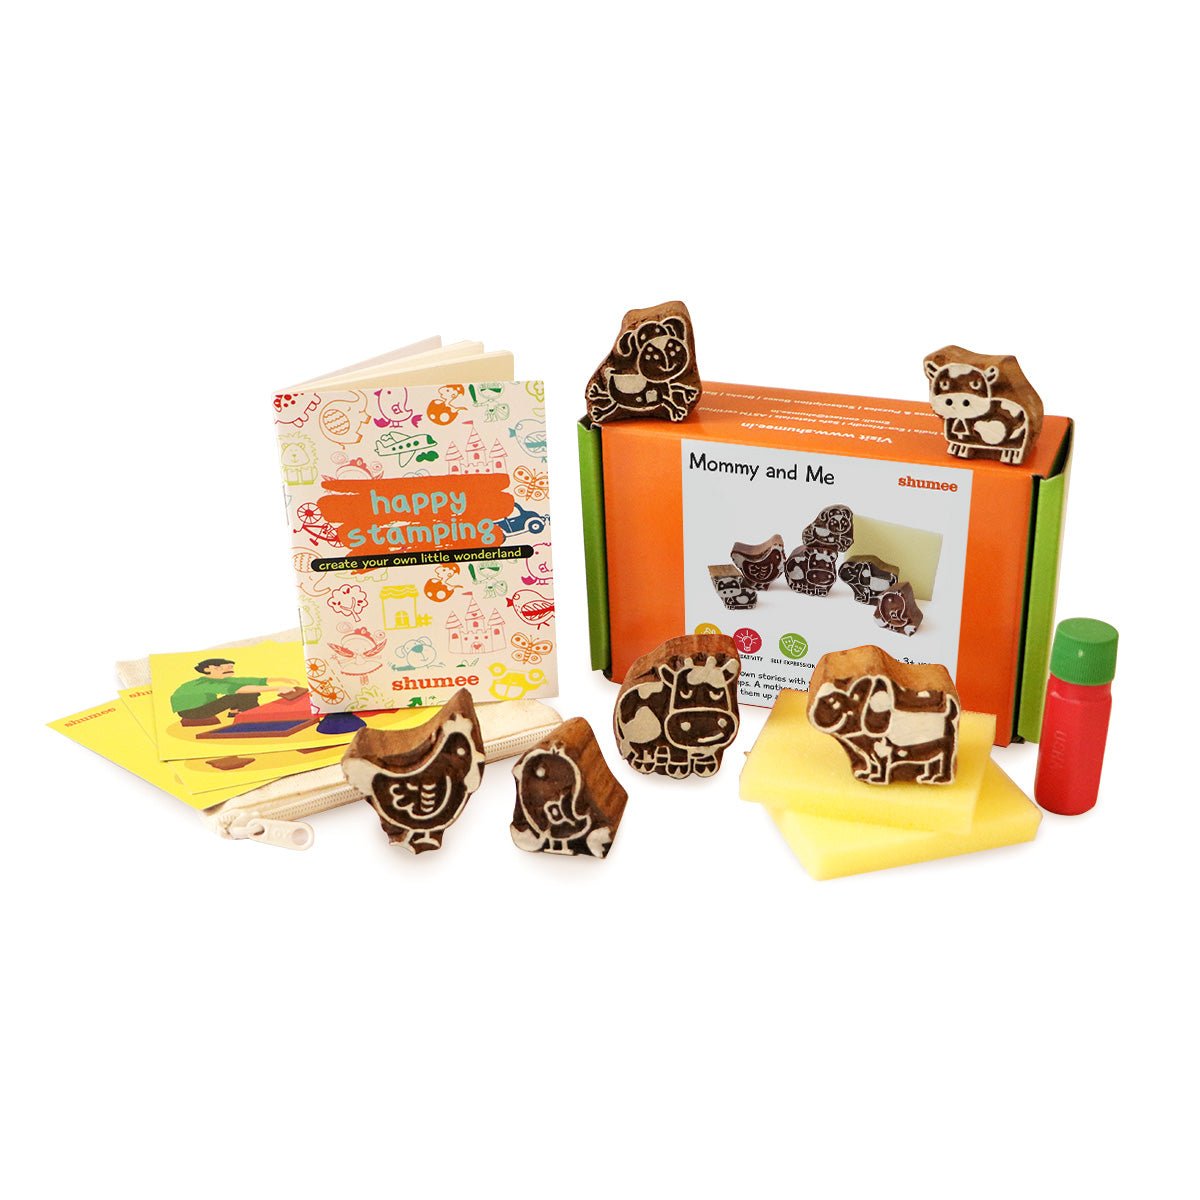 Shumee Mommy And Me Wooden Stamps Set - EXP-IN-IHD-MM-W-3yr-0036